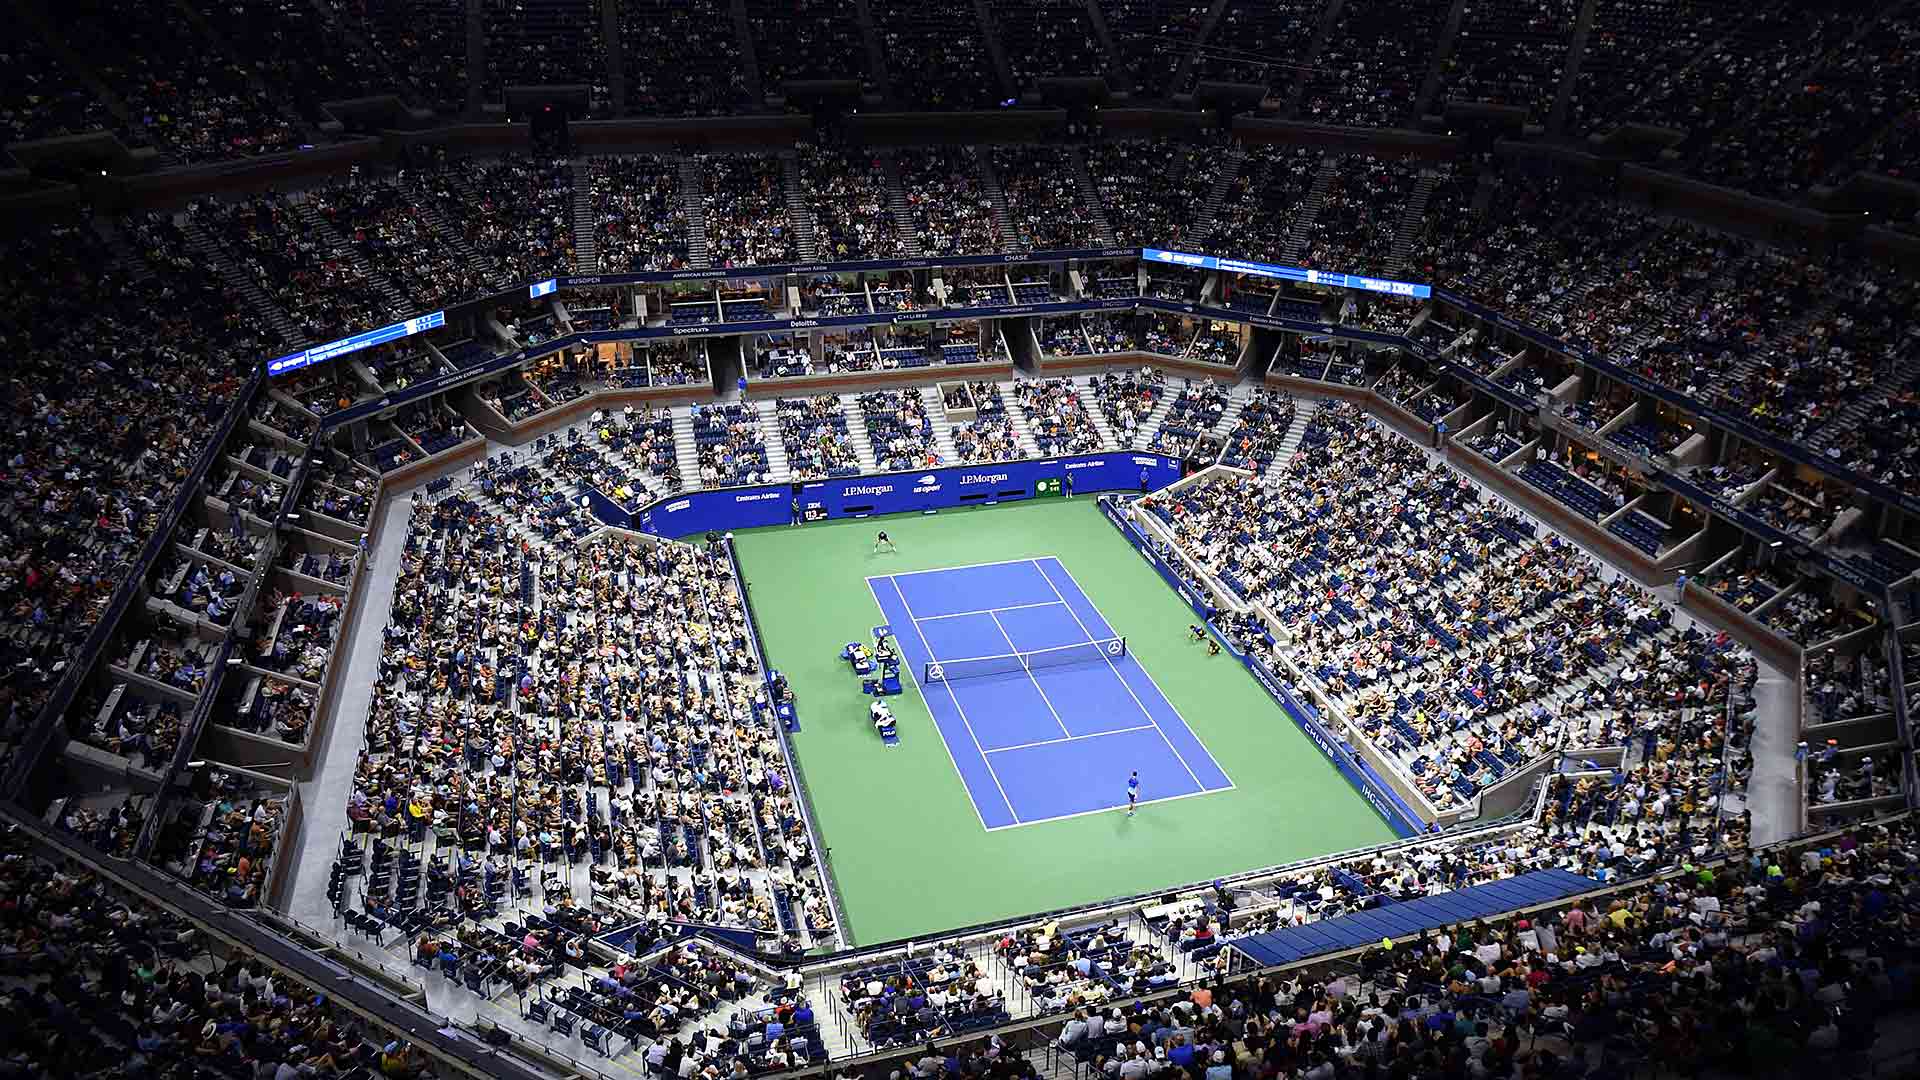 ATP Tour – Tuesday, Oct. 26, 2021 final results – Open Court